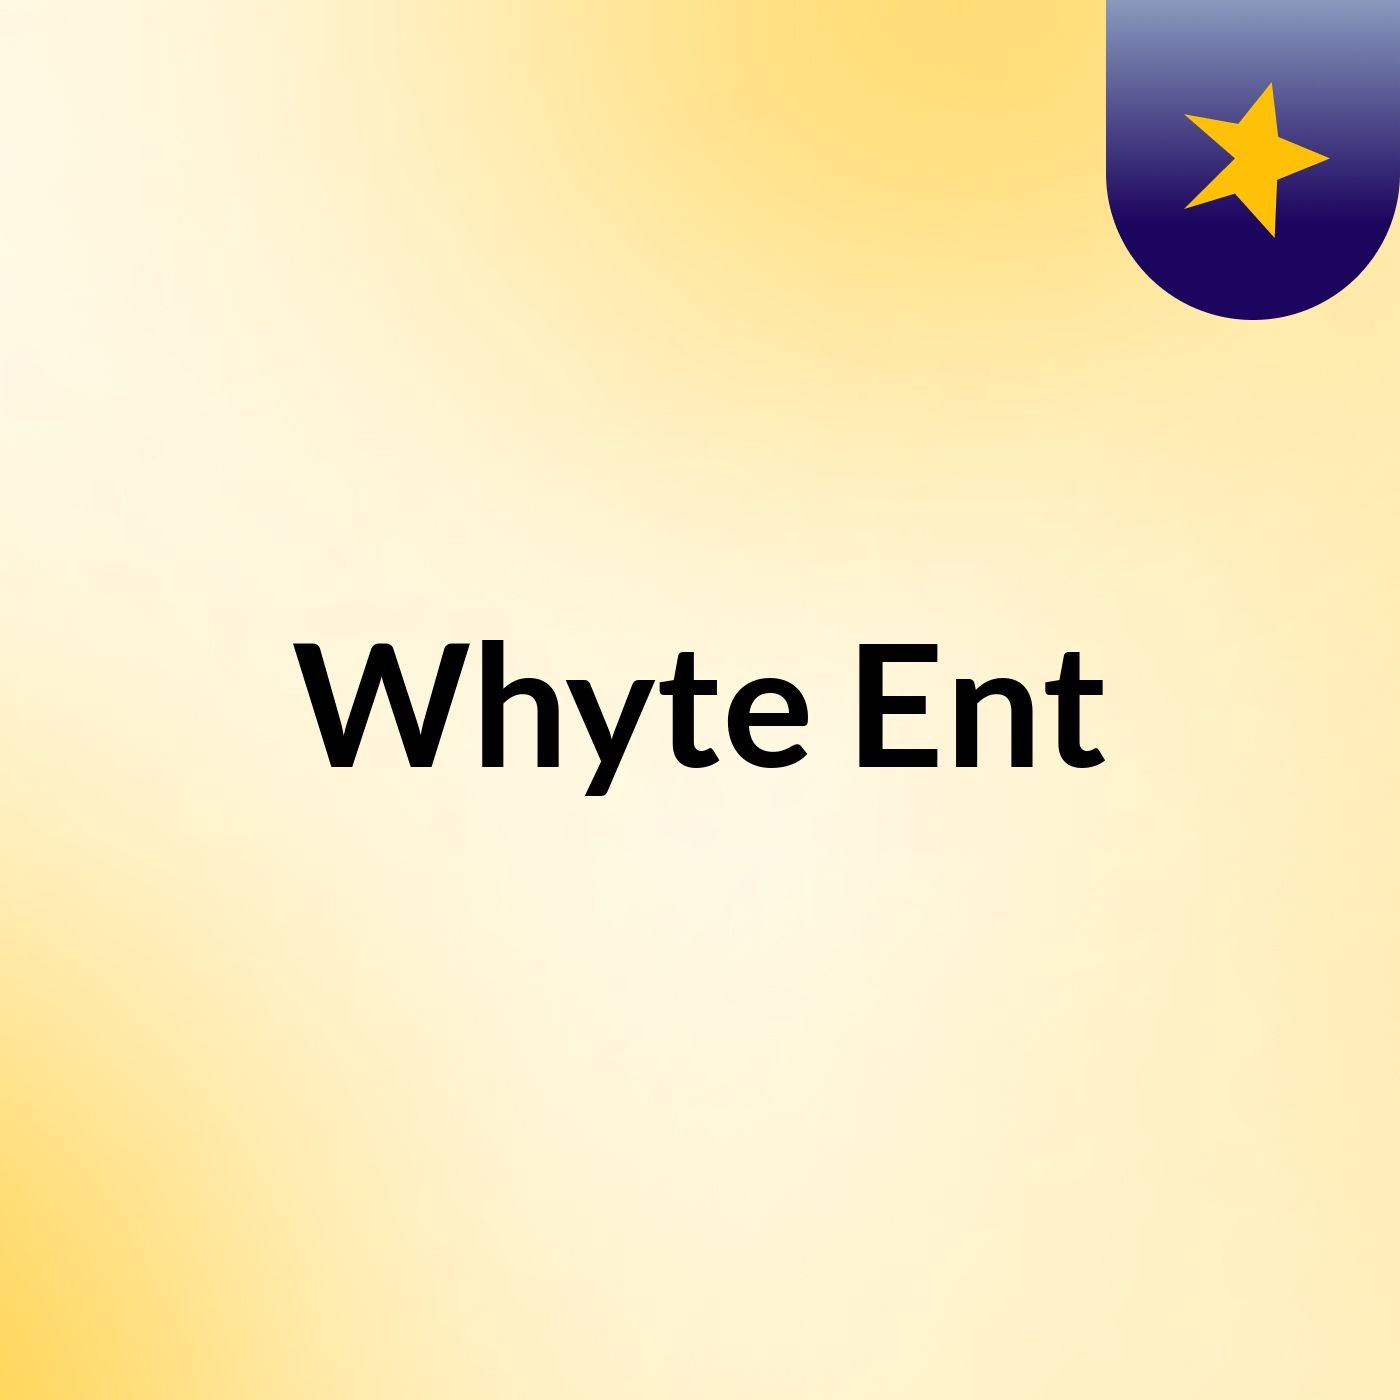 Whyte Ent